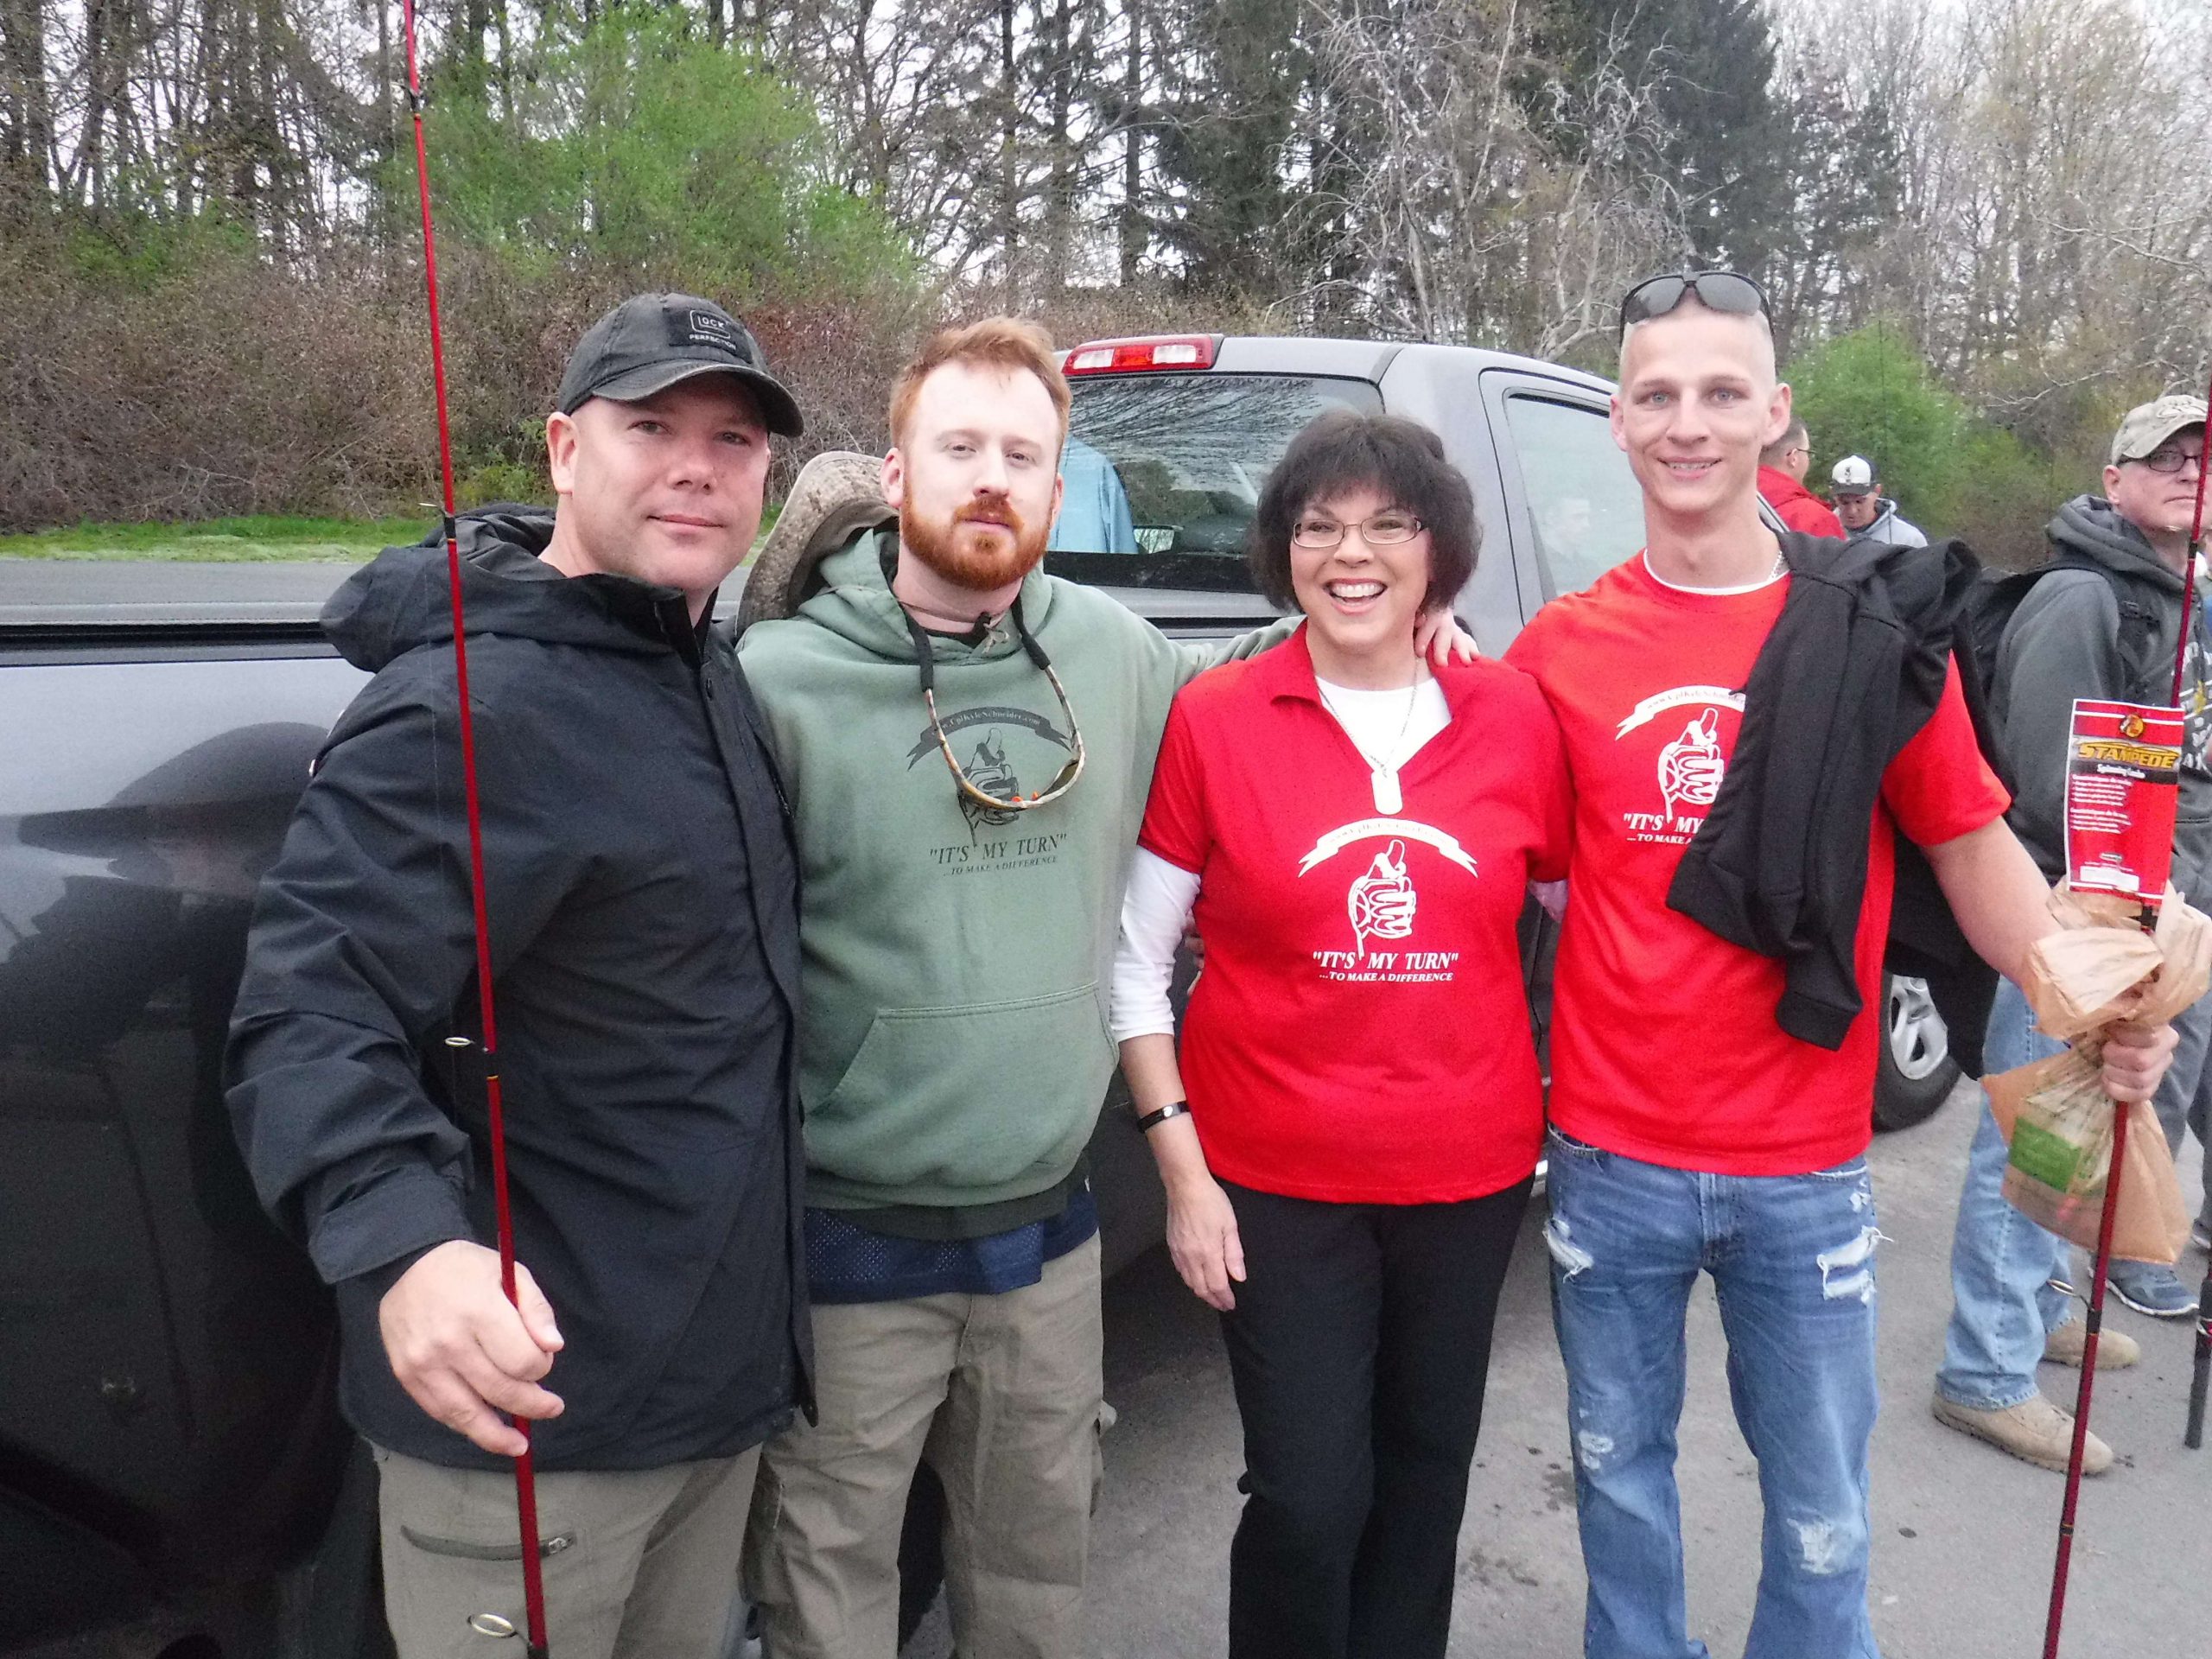 Marines- Brandon, Andrew, and Neil pose with Laurie Schneider, mother of Cpl. Kyle Schneider.